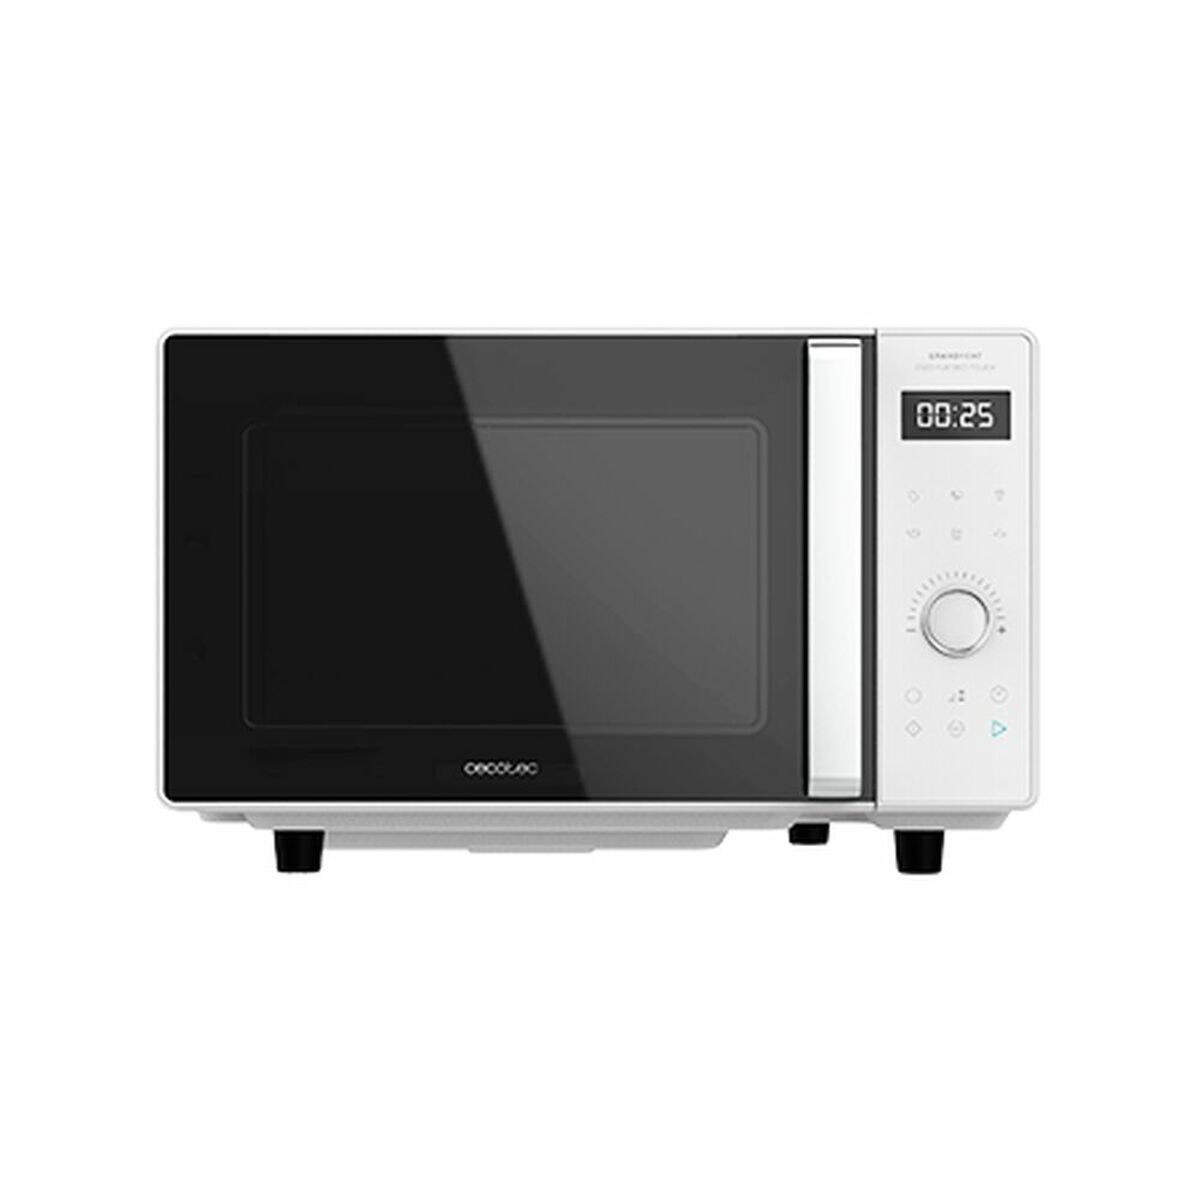 Mikrowelle mit Grill Cecotec GrandHeat 2500 Flatbed Touch White